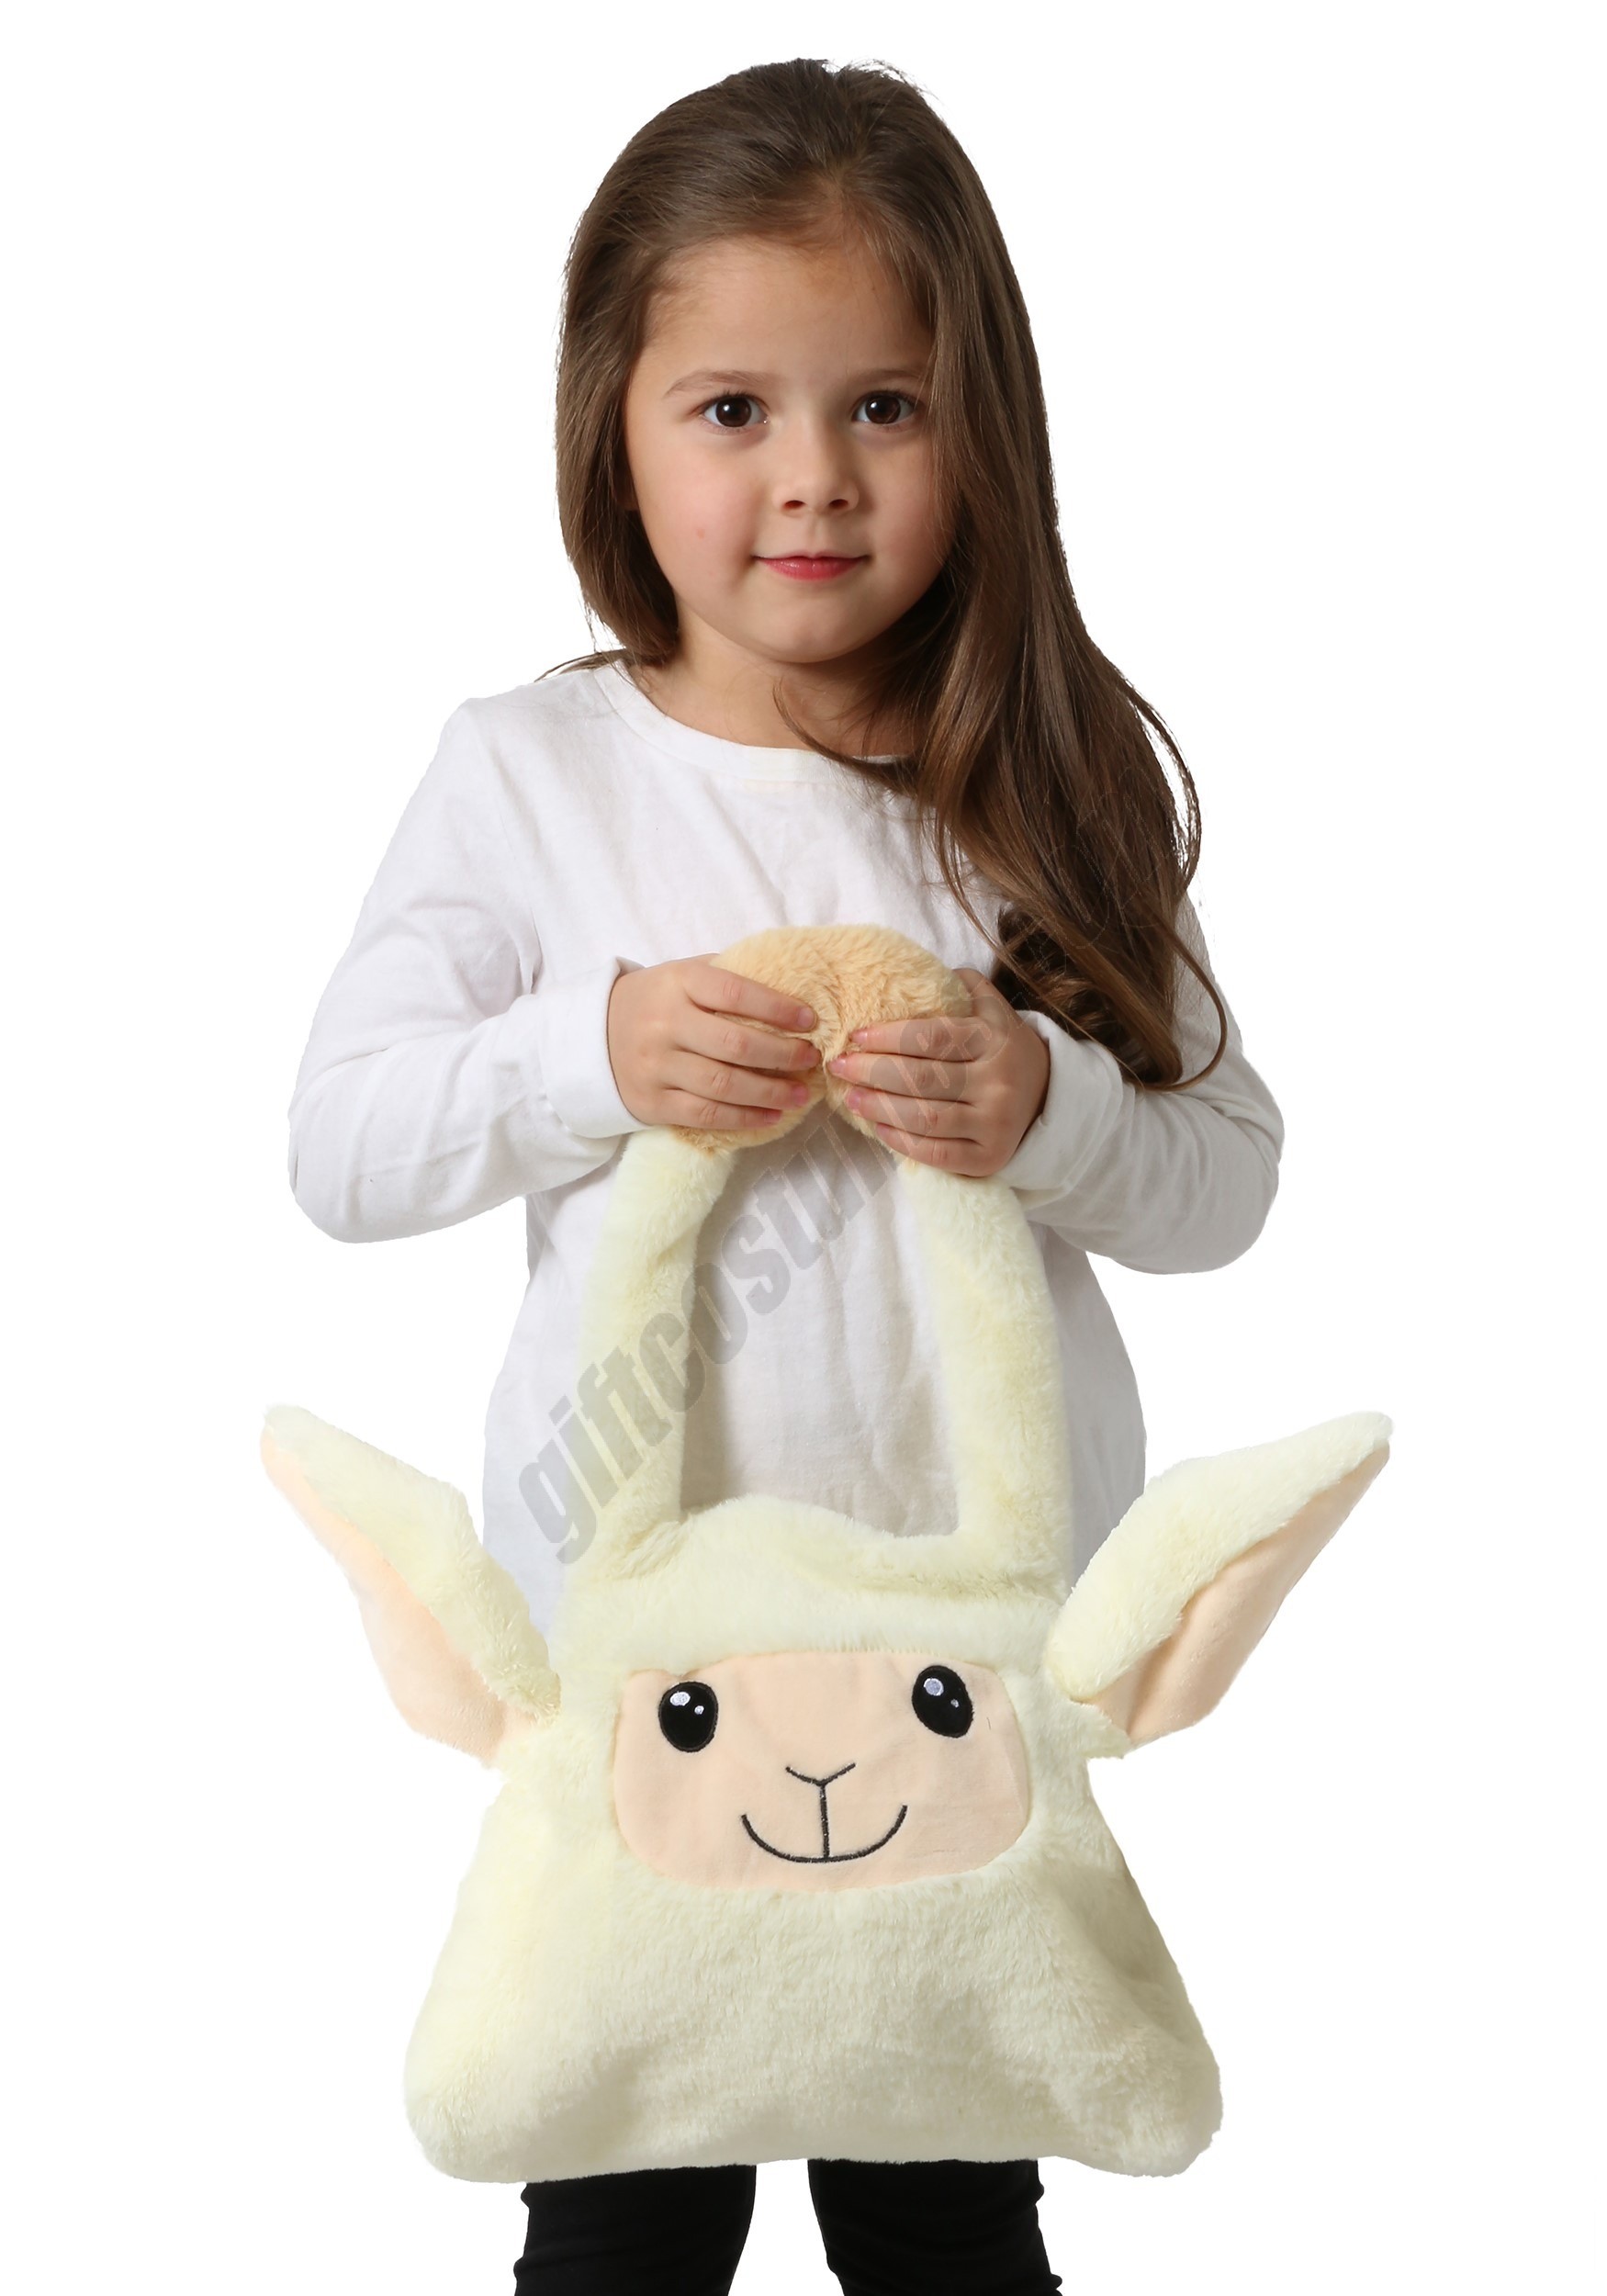 Moving Ears Plush Sheep Trick or Treat Bag Promotions - Moving Ears Plush Sheep Trick or Treat Bag Promotions